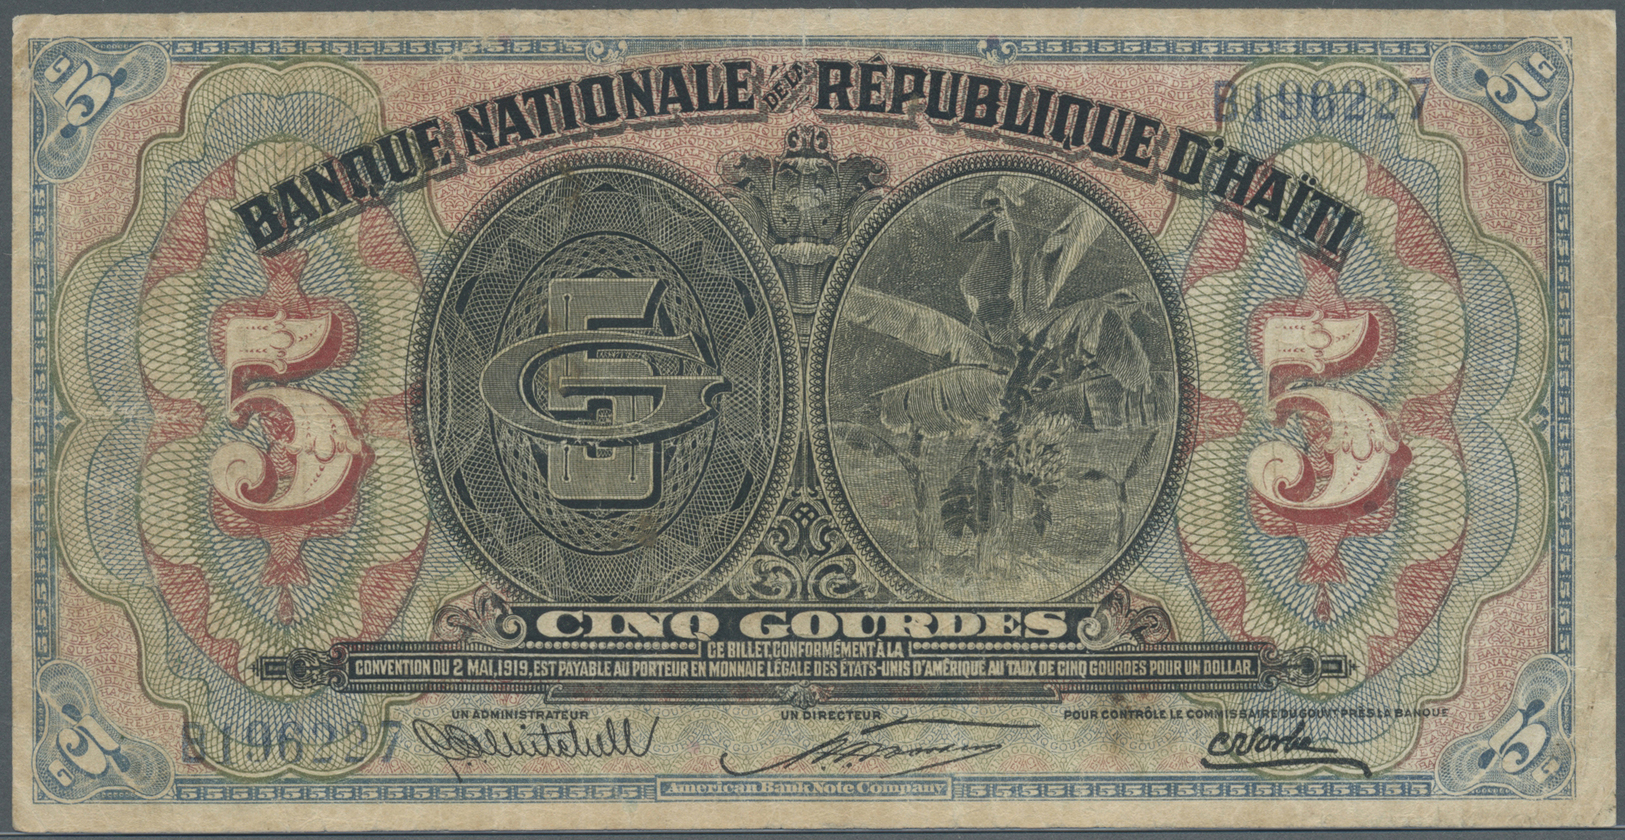 00979 Haiti: 5 Gourdes ND(1920-24) P. 152a, More Rare Higher Denomination Of This Series, Used With Many Folds And Creas - Haiti